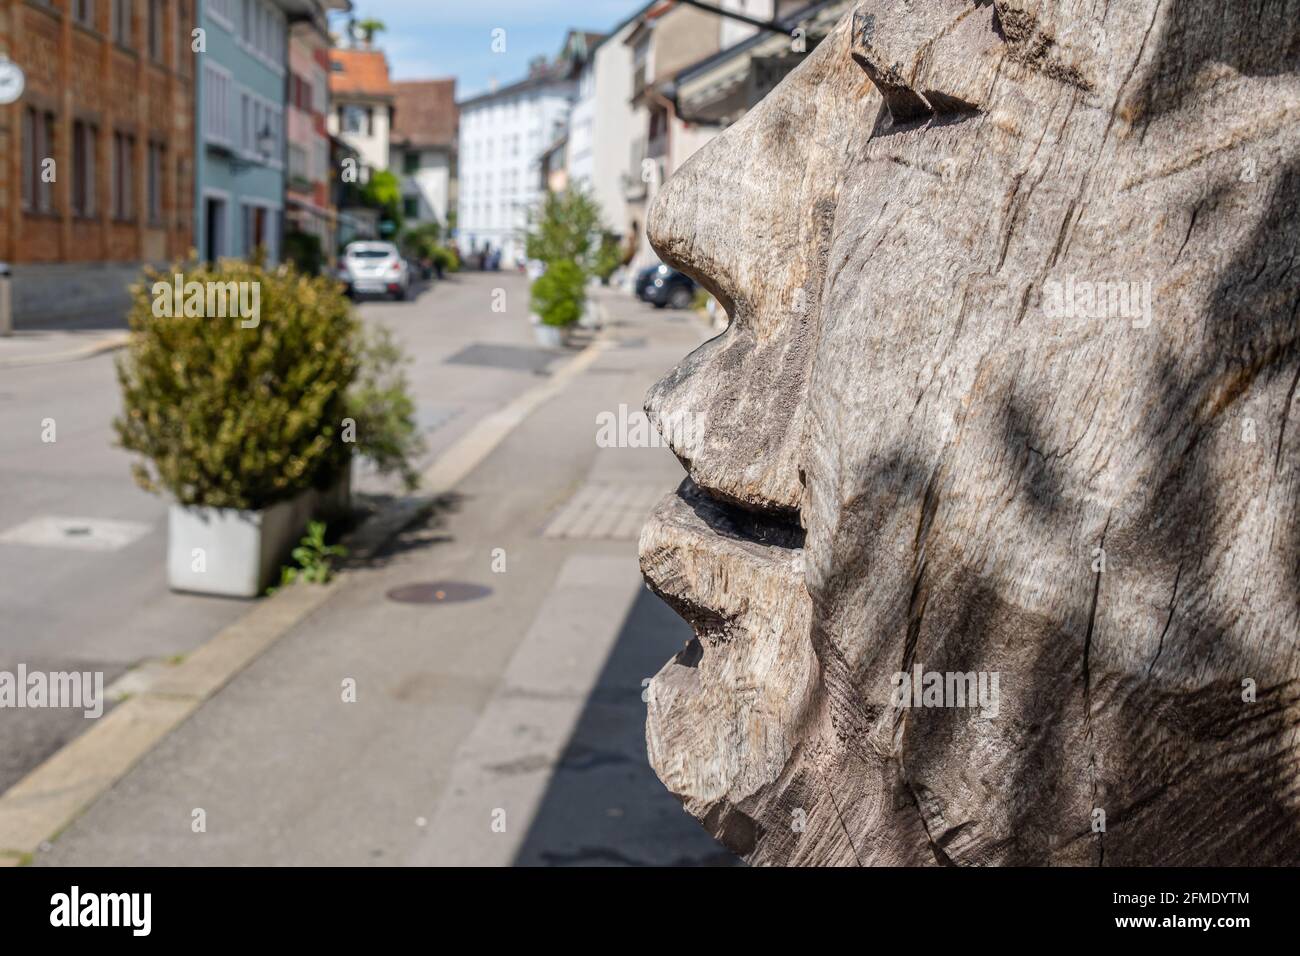 Winterthur, Switzerland - May 7, 2020: Decorative wooden sculpture of a human face Stock Photo